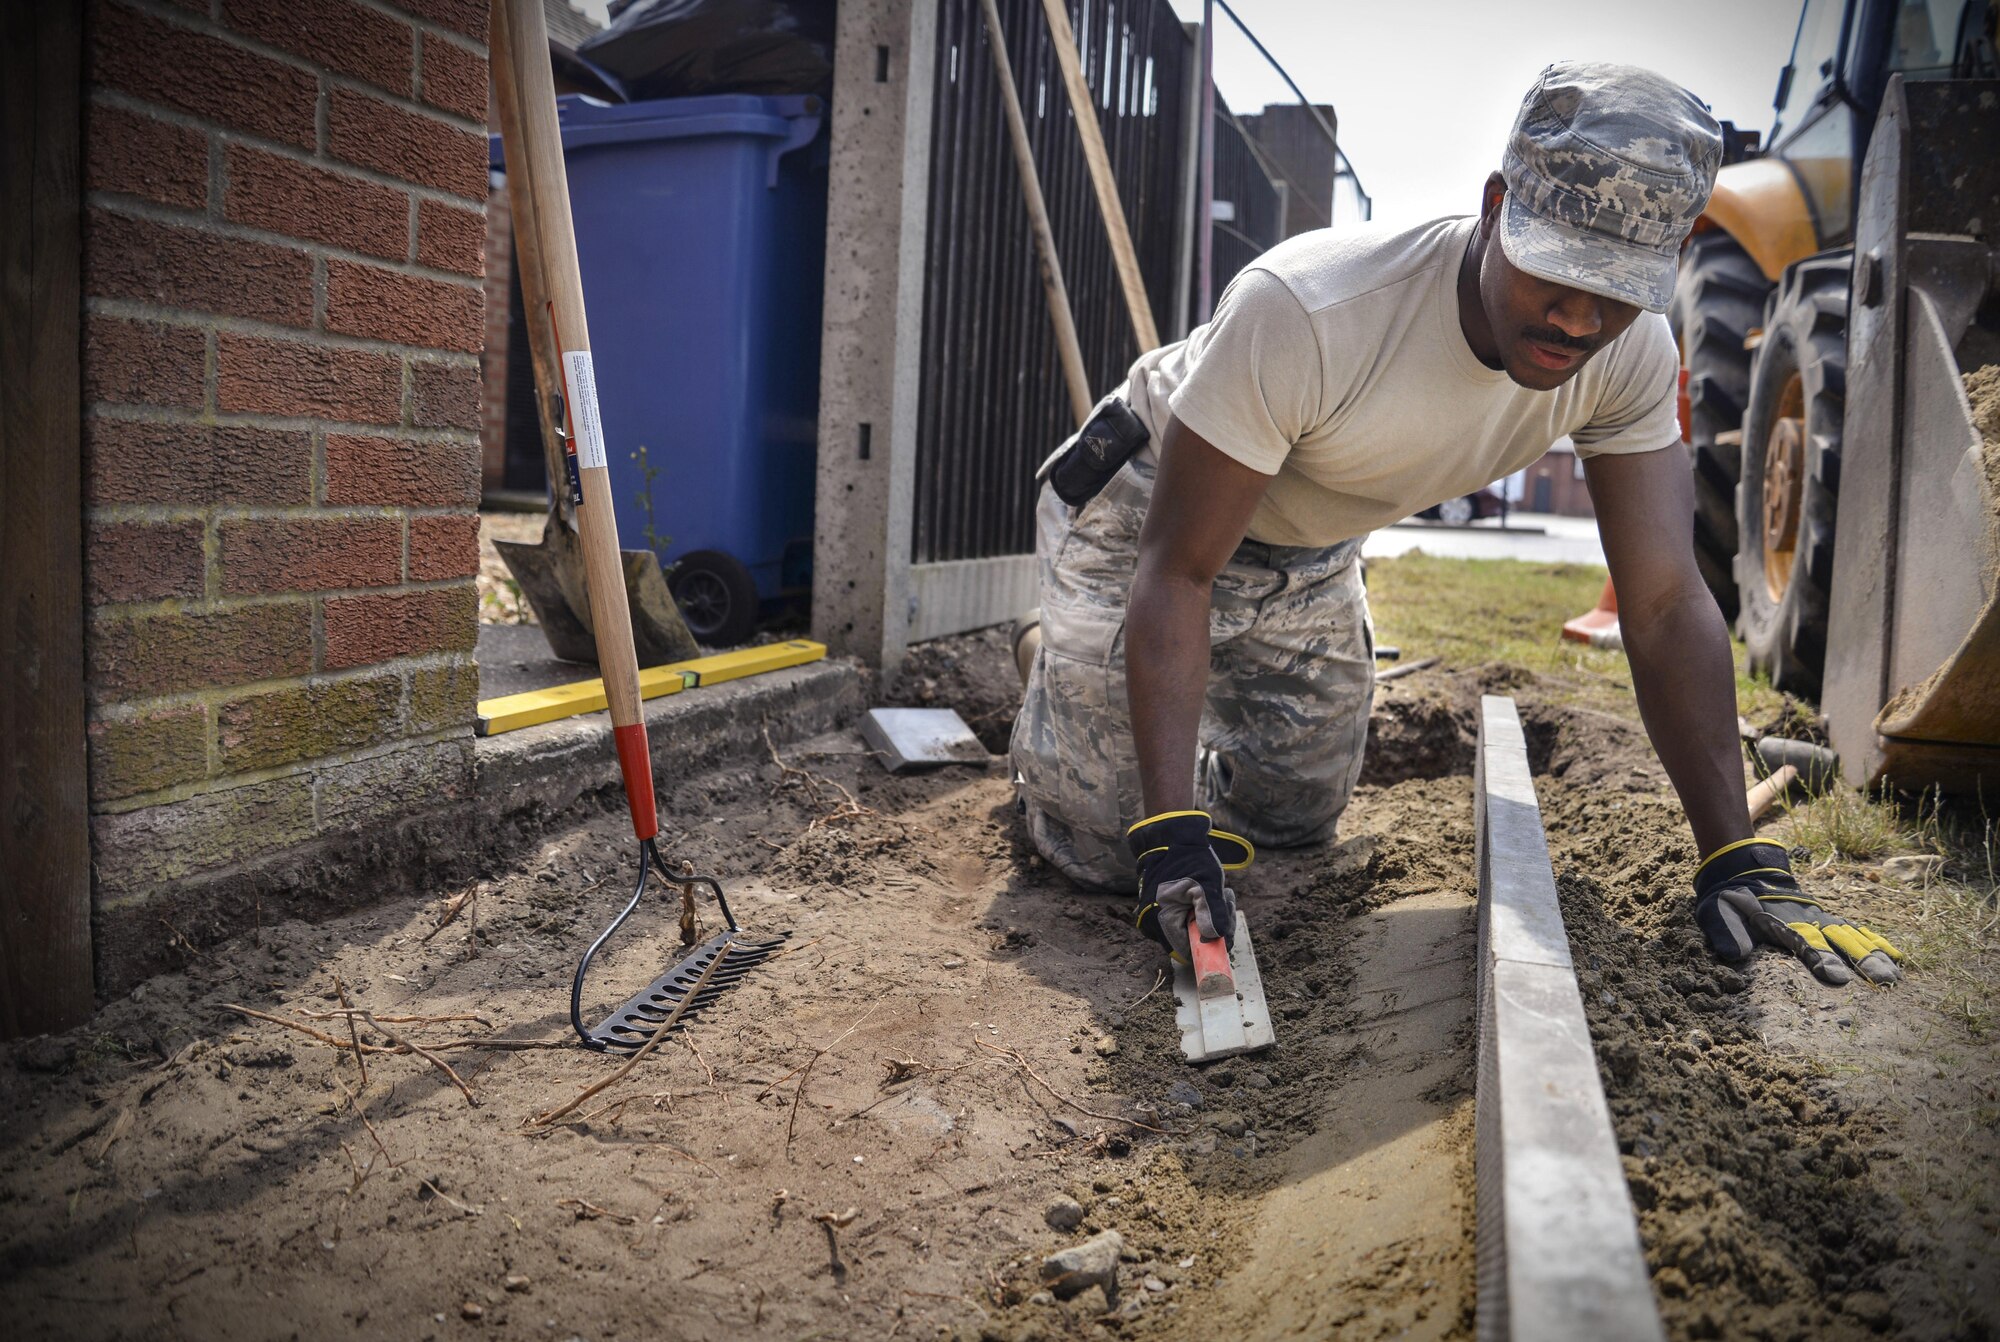 U.S. Air Force Senior Airman Dishawn Harvey, 100th Civil Engineer Squadron Horizontal Pavement and Construction Equipment operator, smooths out cement mixture June 8, 2016, on RAF Mildenhall, England. The 100th CES Horizontal Pavement and Construction Equipment has eight Airmen and civilians who work together on a wide variety of projects around base. (U.S. Air Force photo by Senior Airman Christine Halan/Released)